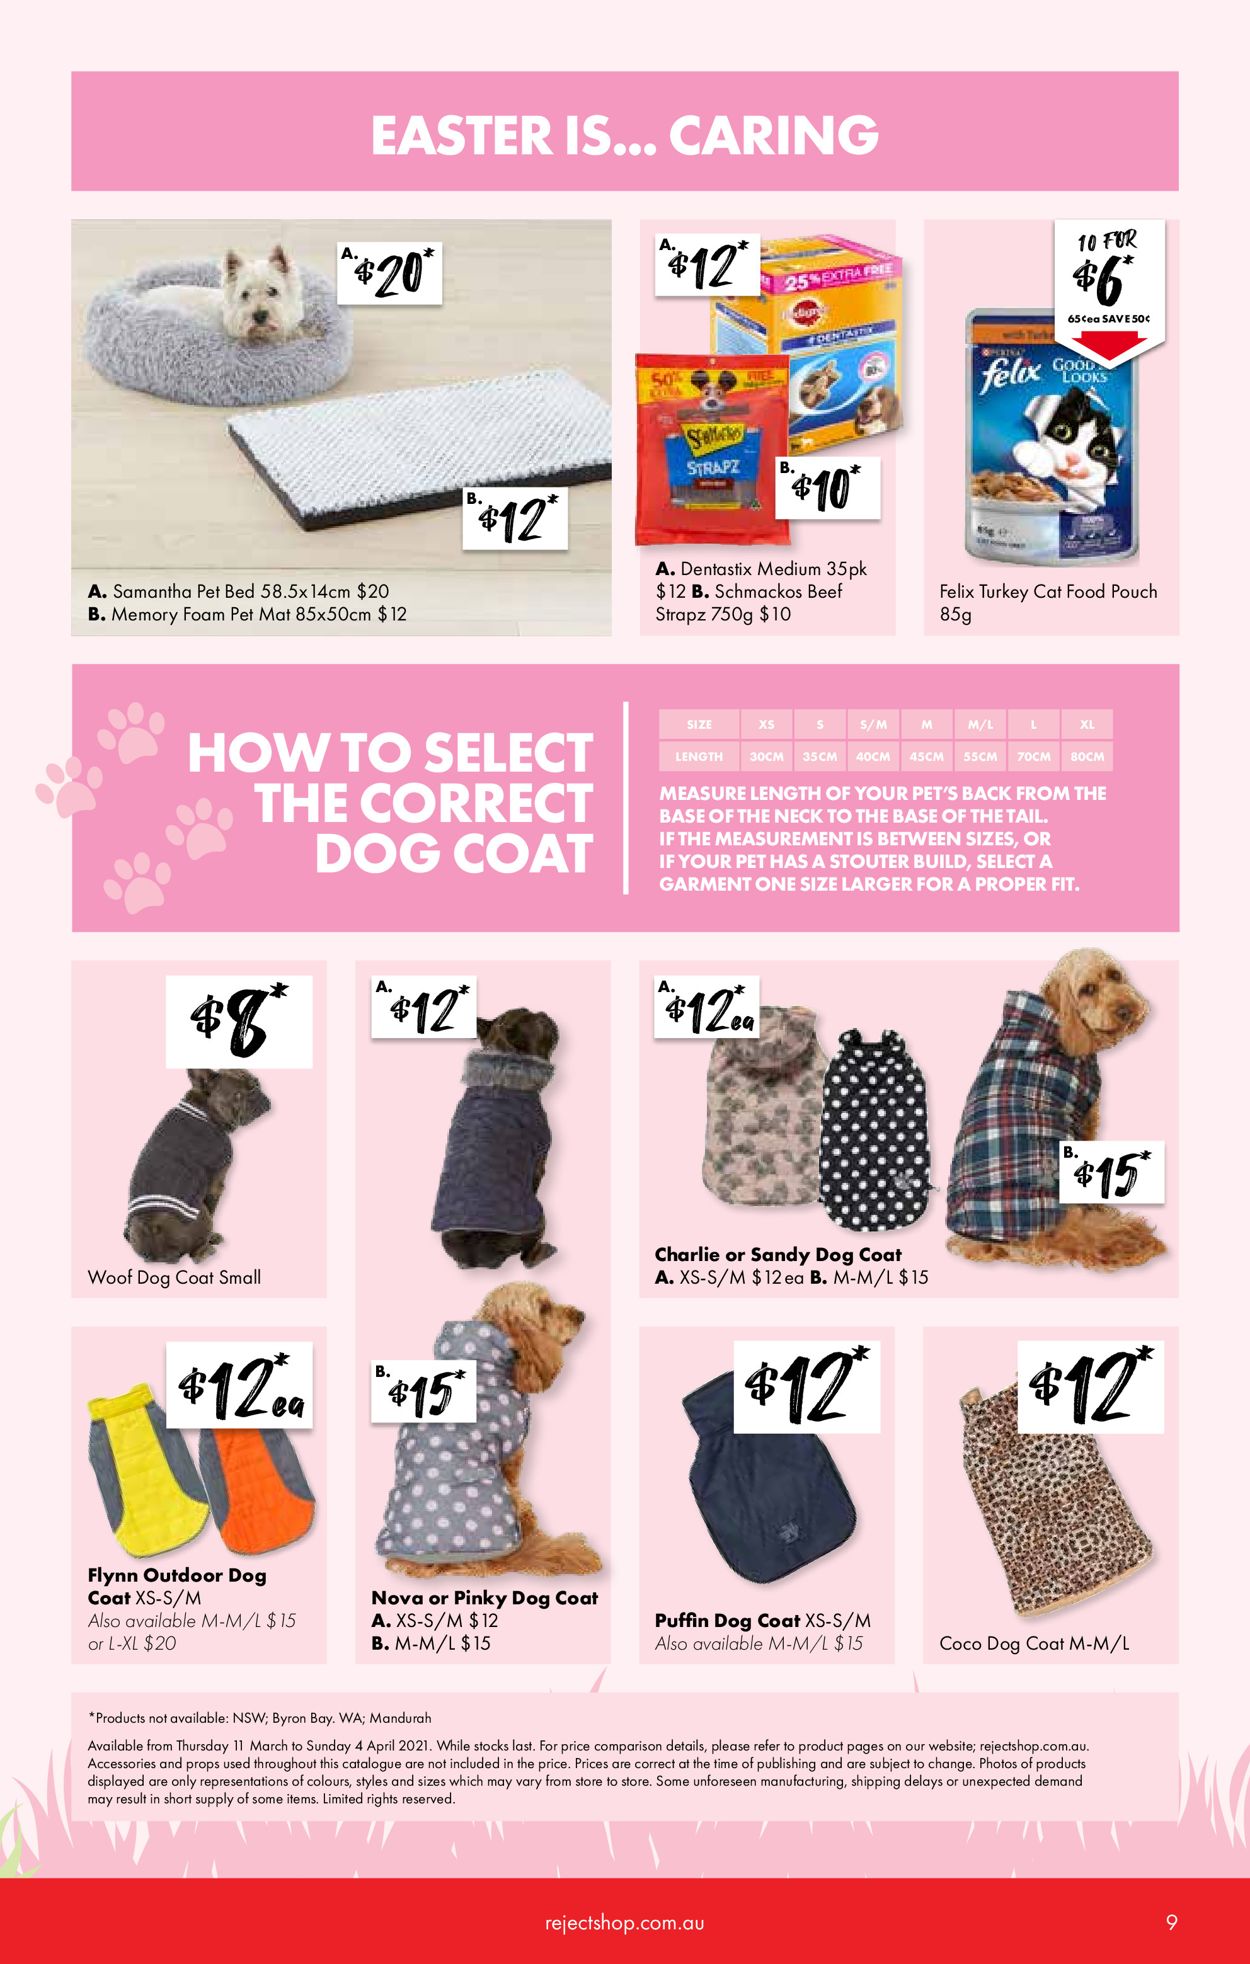 The Reject Shop Catalogue from 11/03/2021